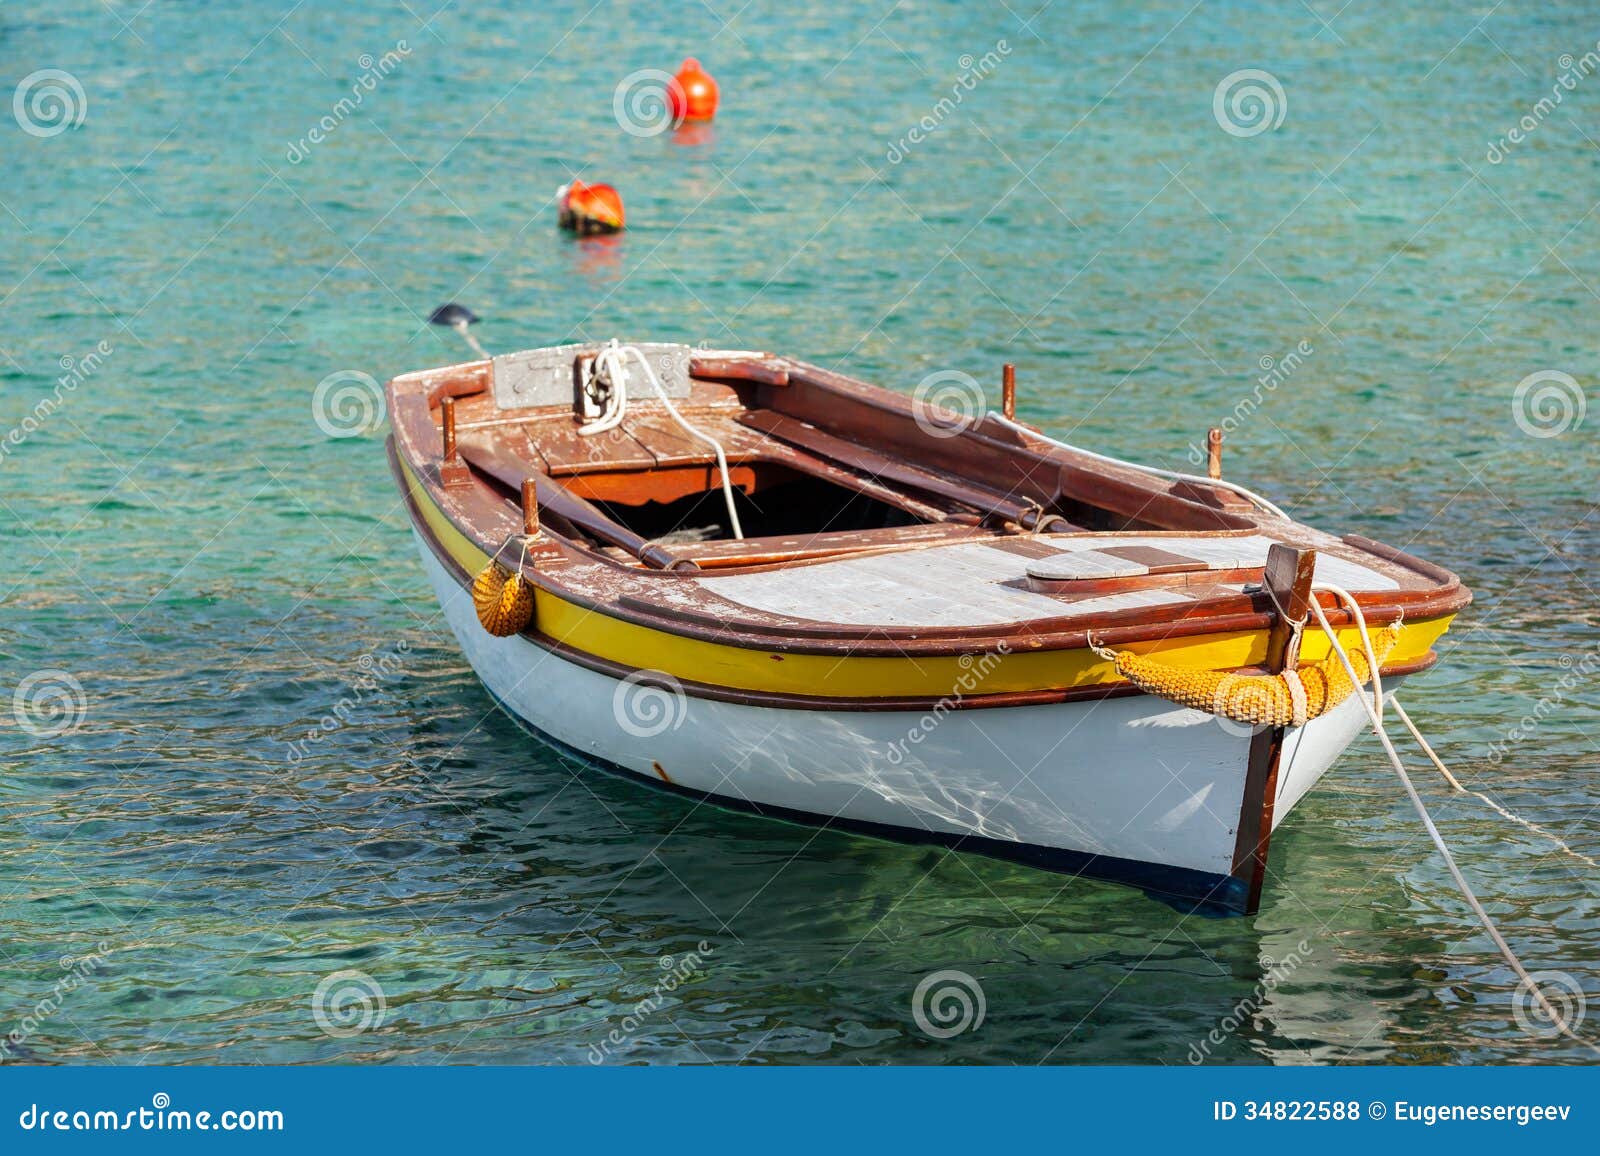 Wooden Fishing Boat Floats In Adriatic Sea Royalty Free Stock Photos 